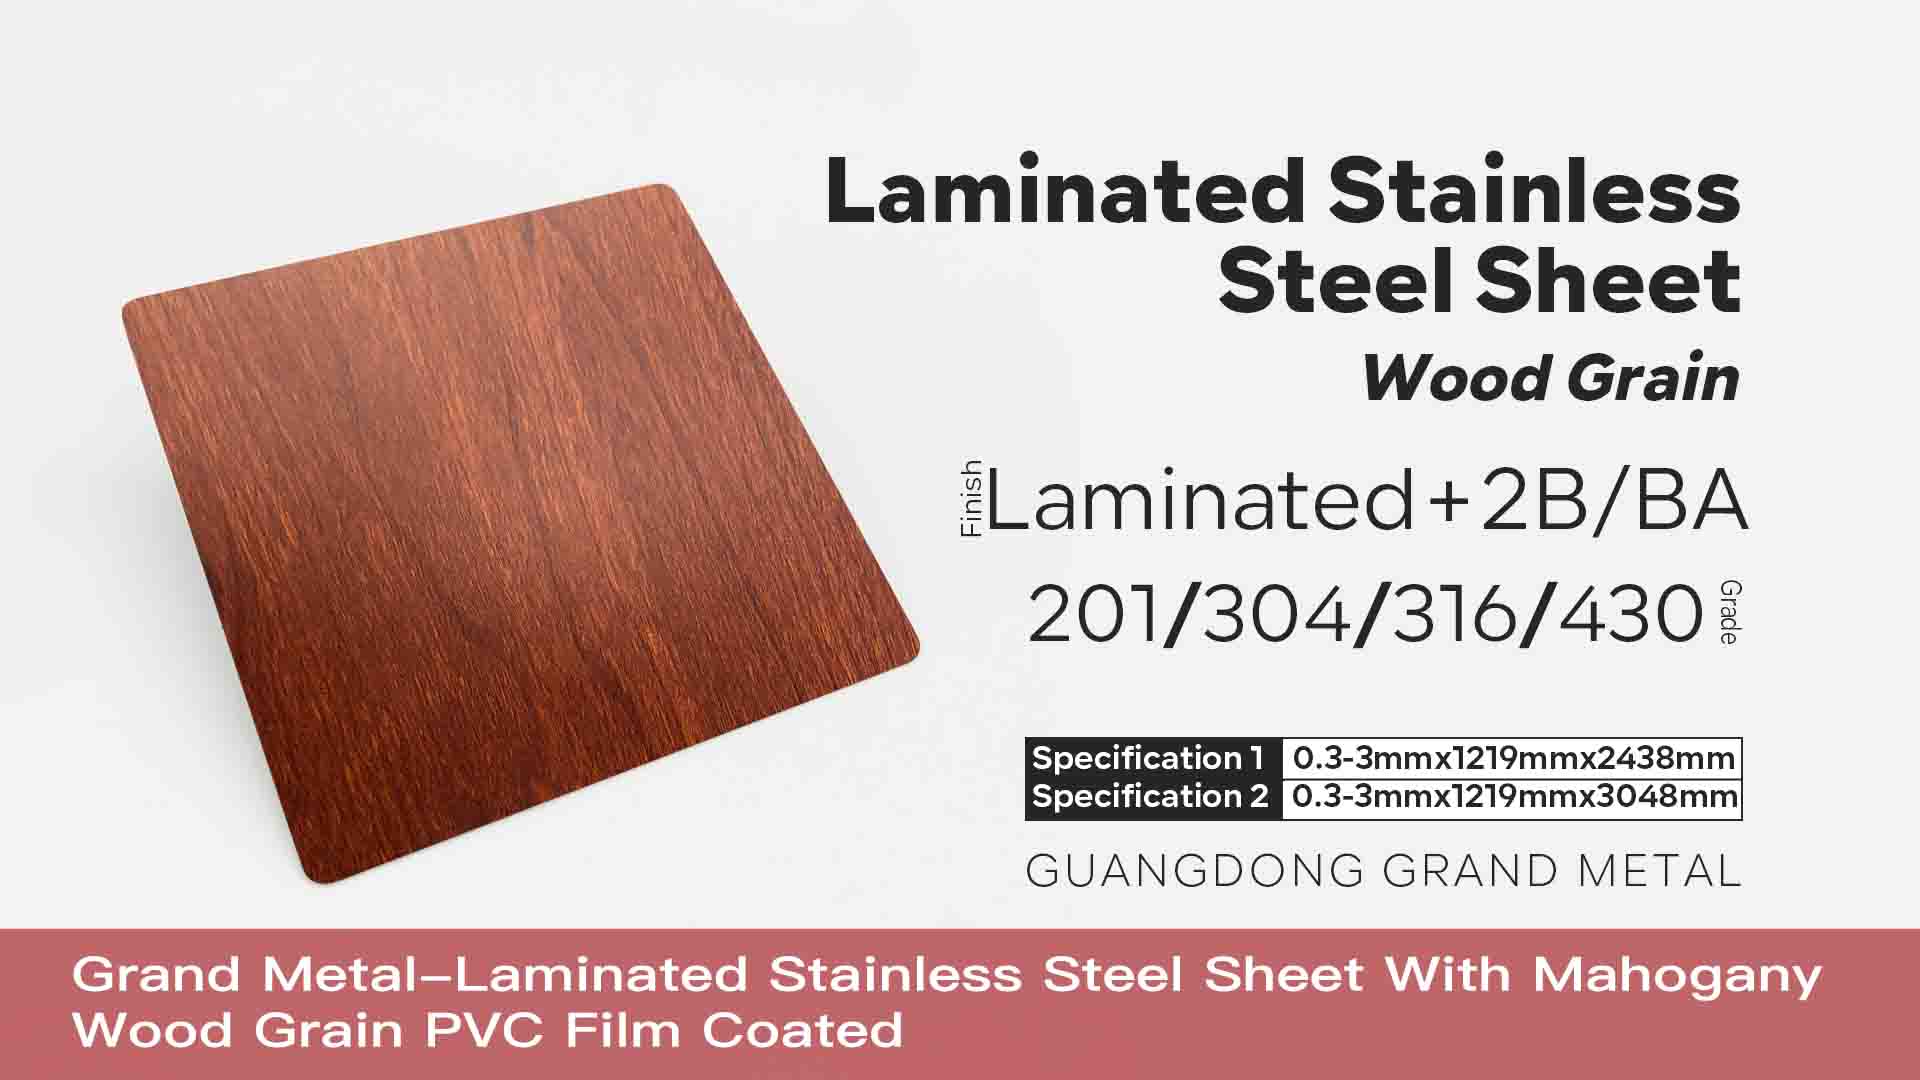 Laminated Stainless Steel Sheet With Mahogany Wood Grain PVC Film Coated